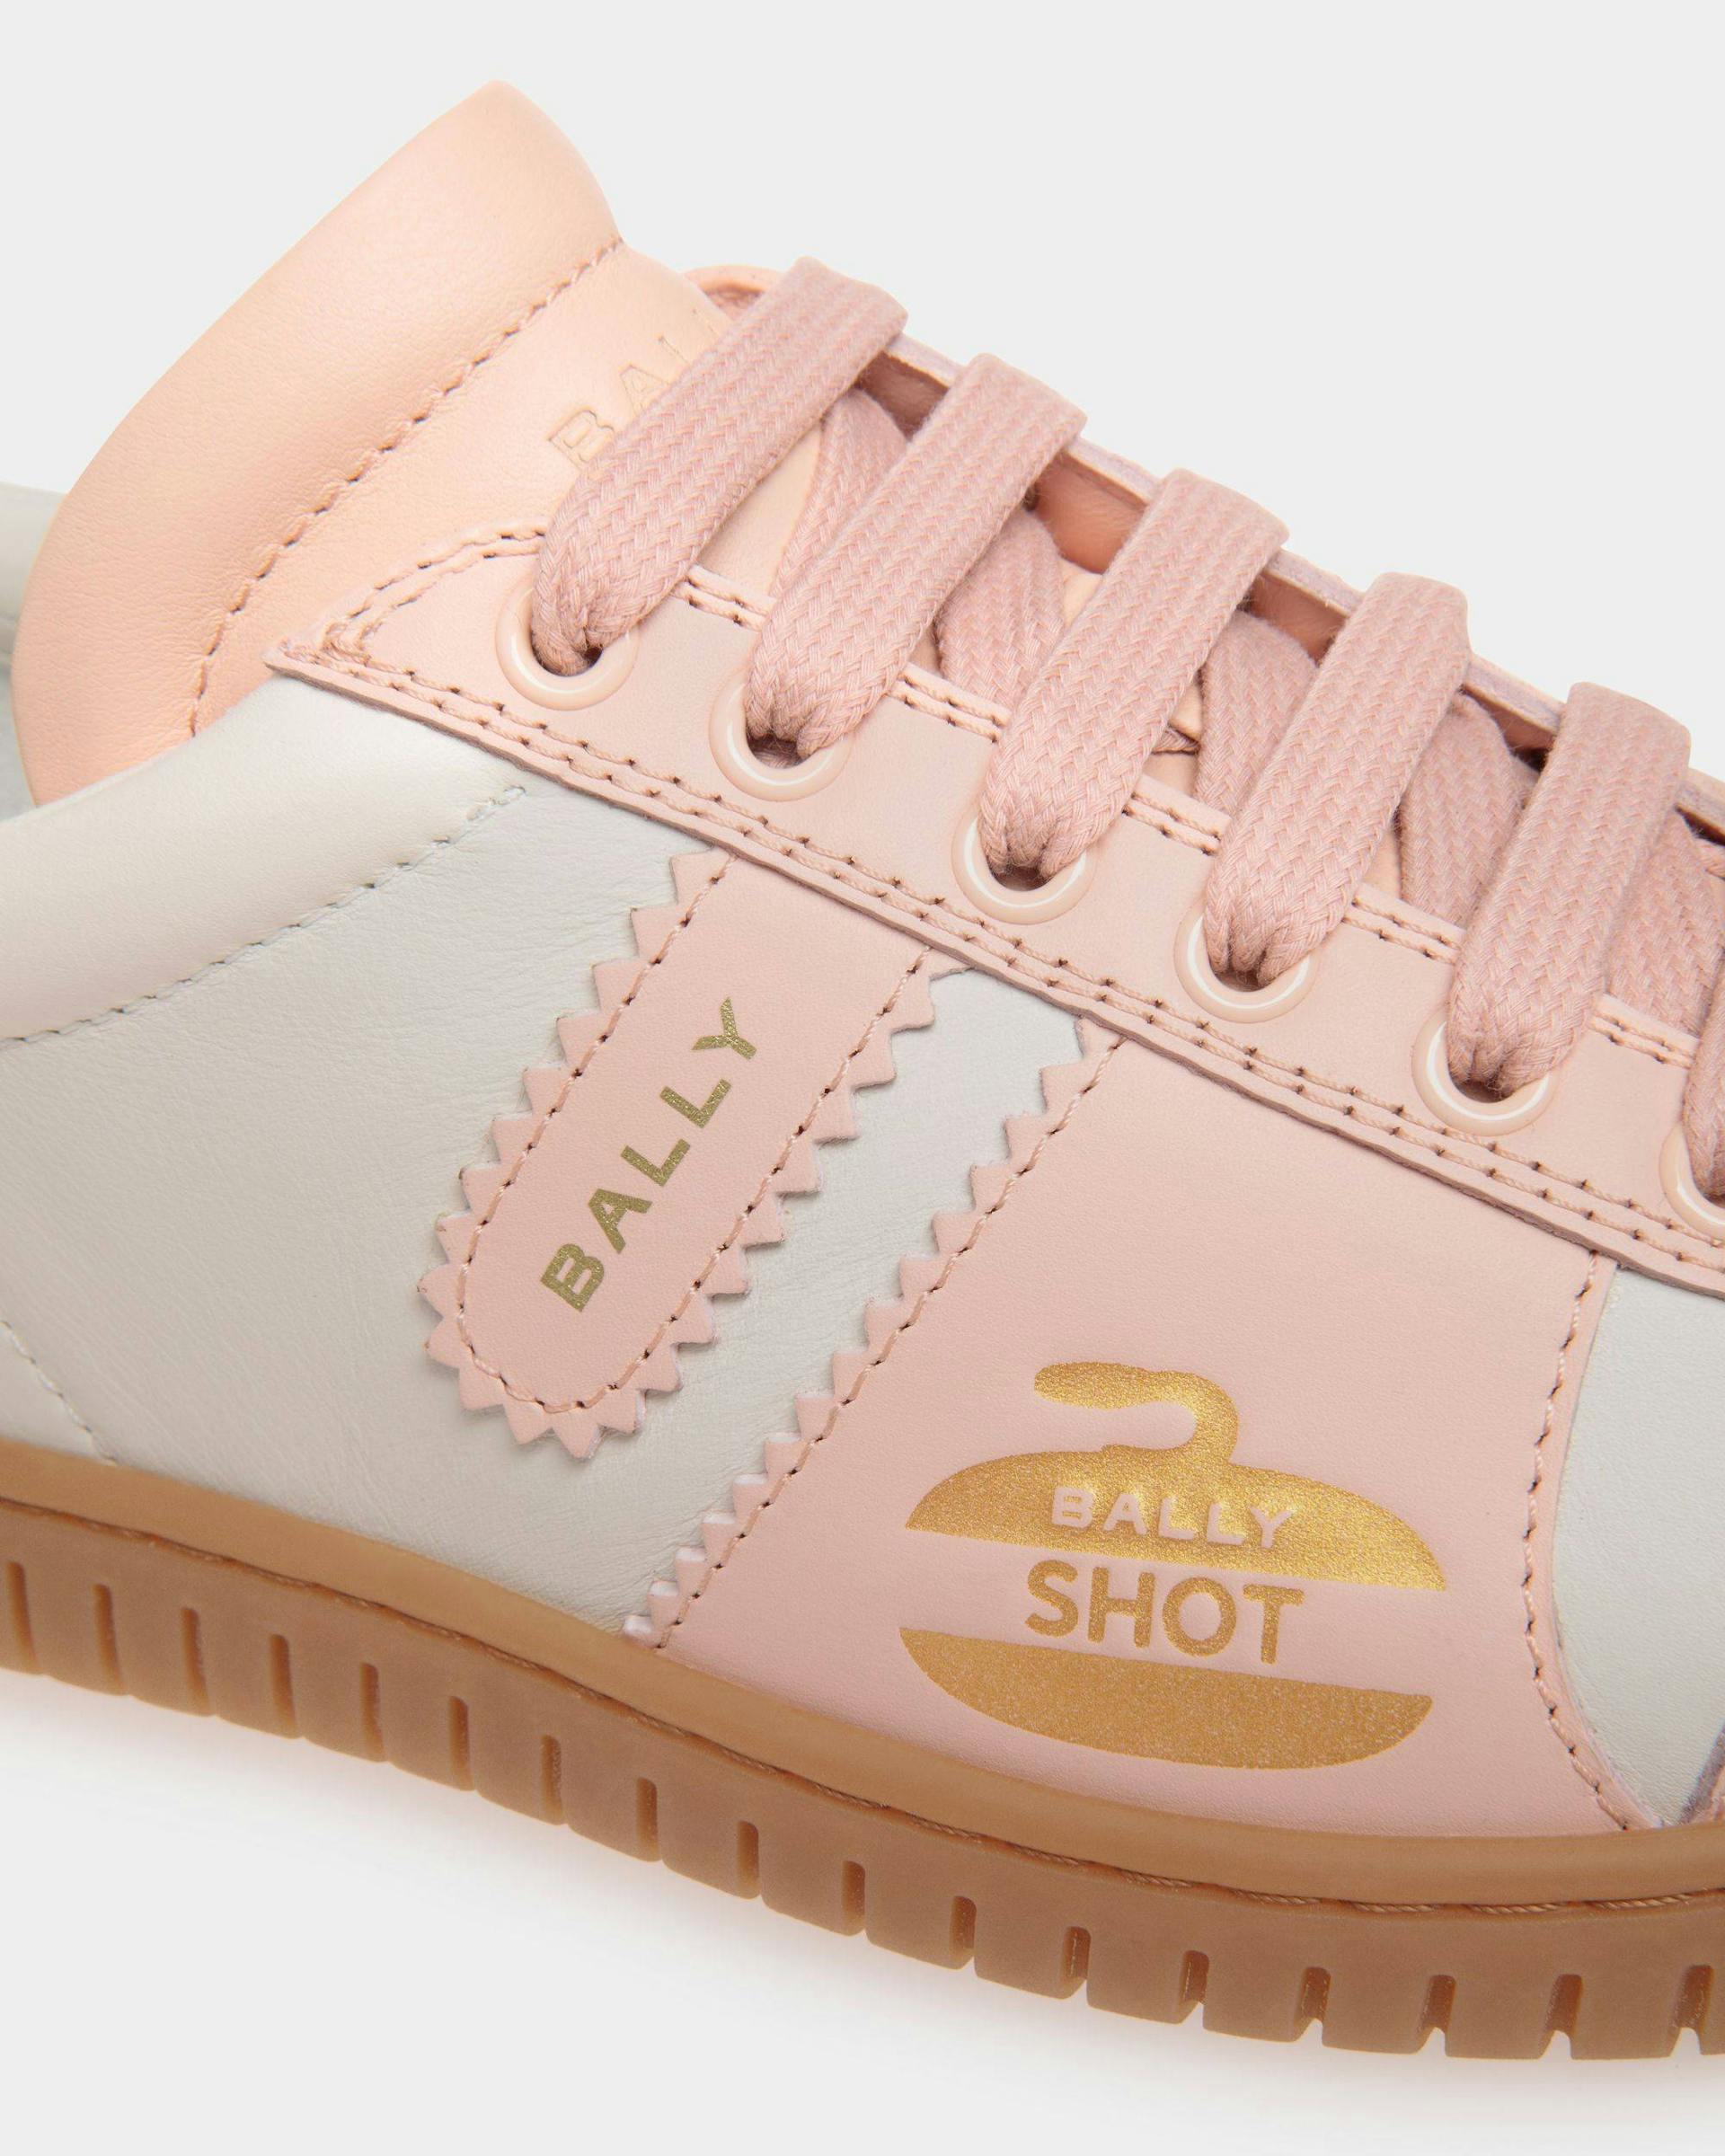 Women's Player Sneaker in White and Baby Pink Leather | Bally | Still Life Detail